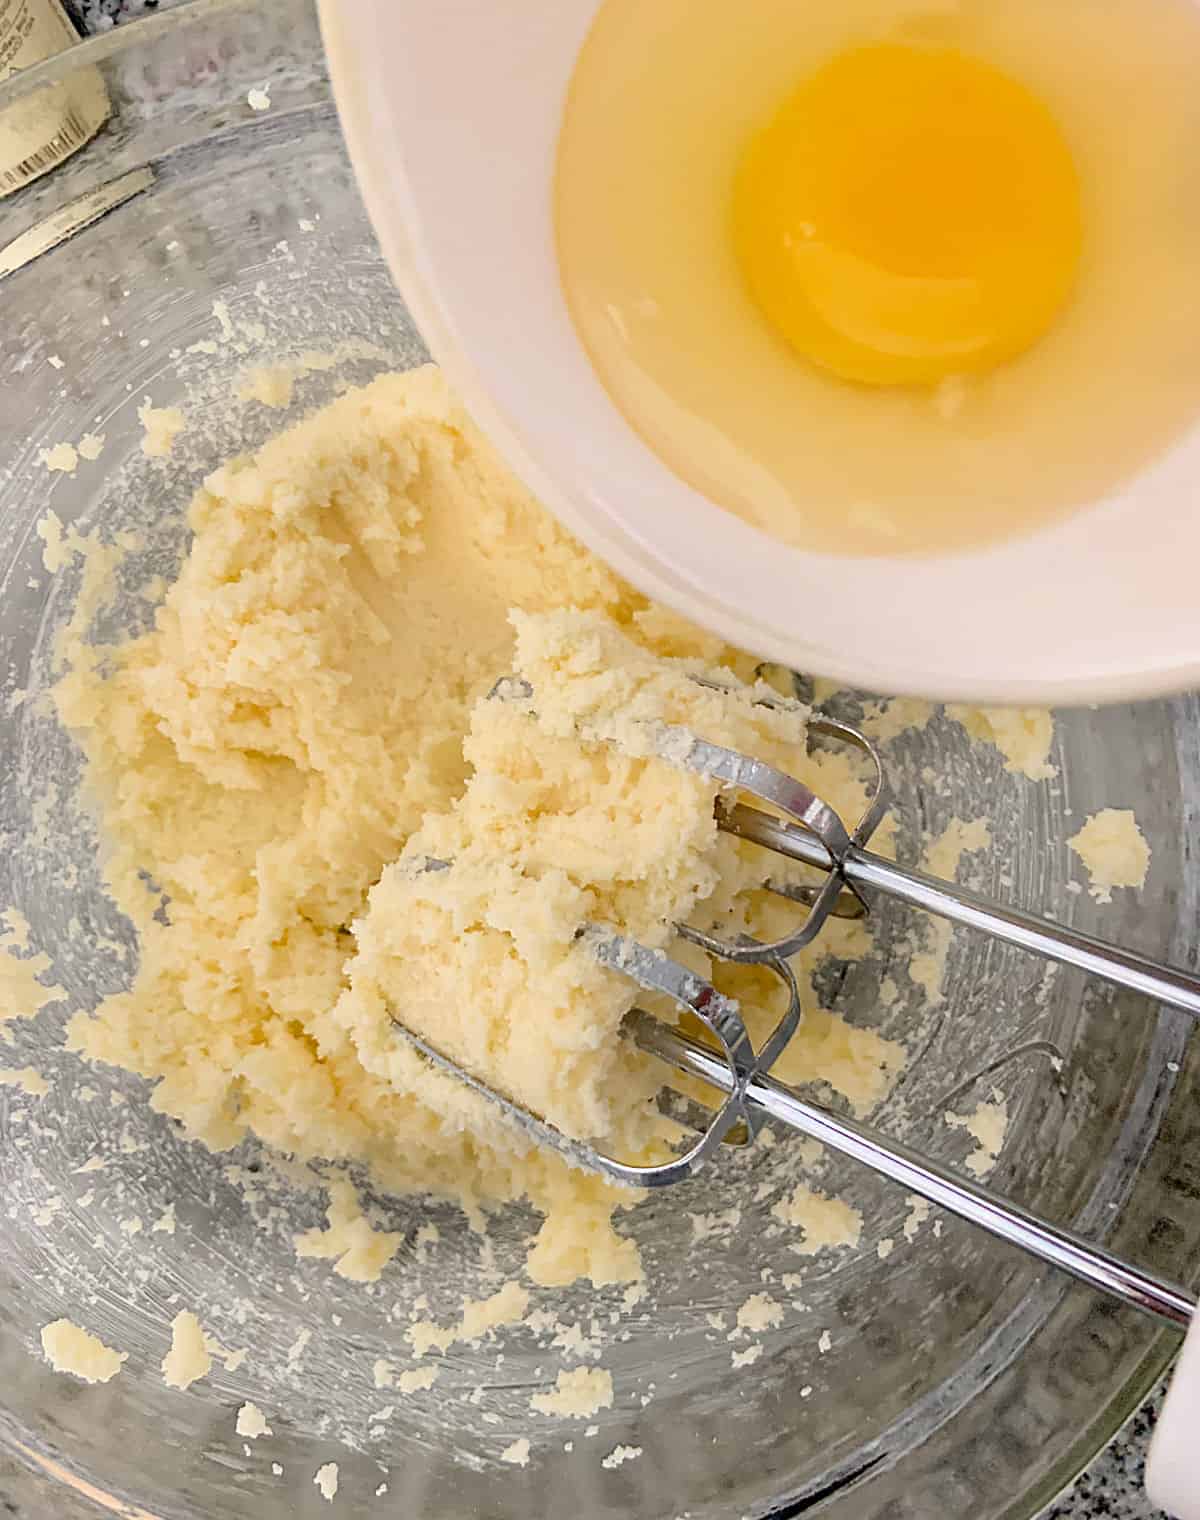 Adding egg from a white bowl to cake batter in glass bowl, beaters inside